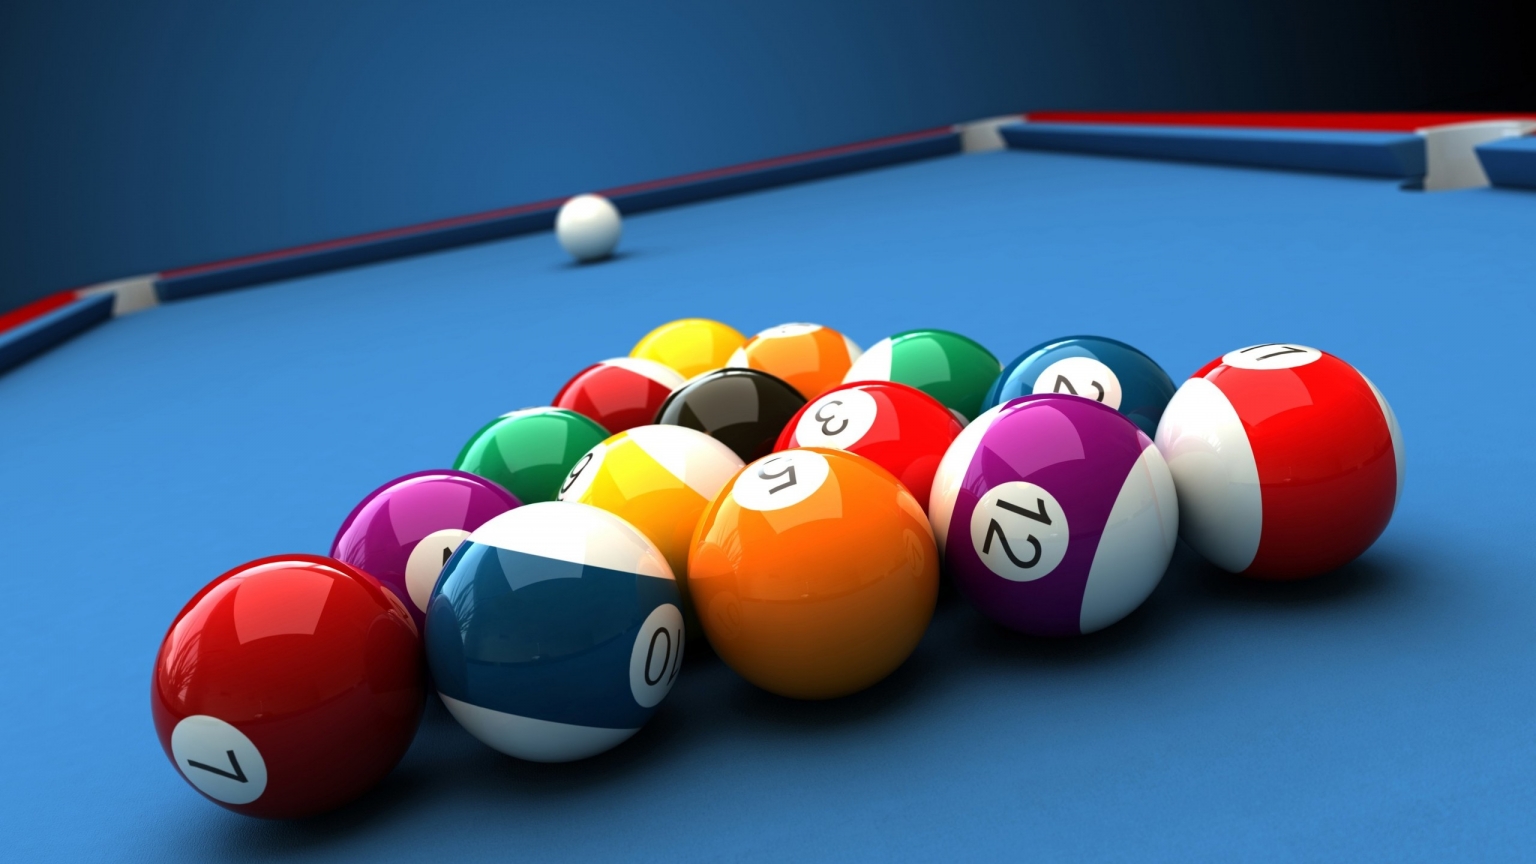 Billiards Table and Balls for 1536 x 864 HDTV resolution